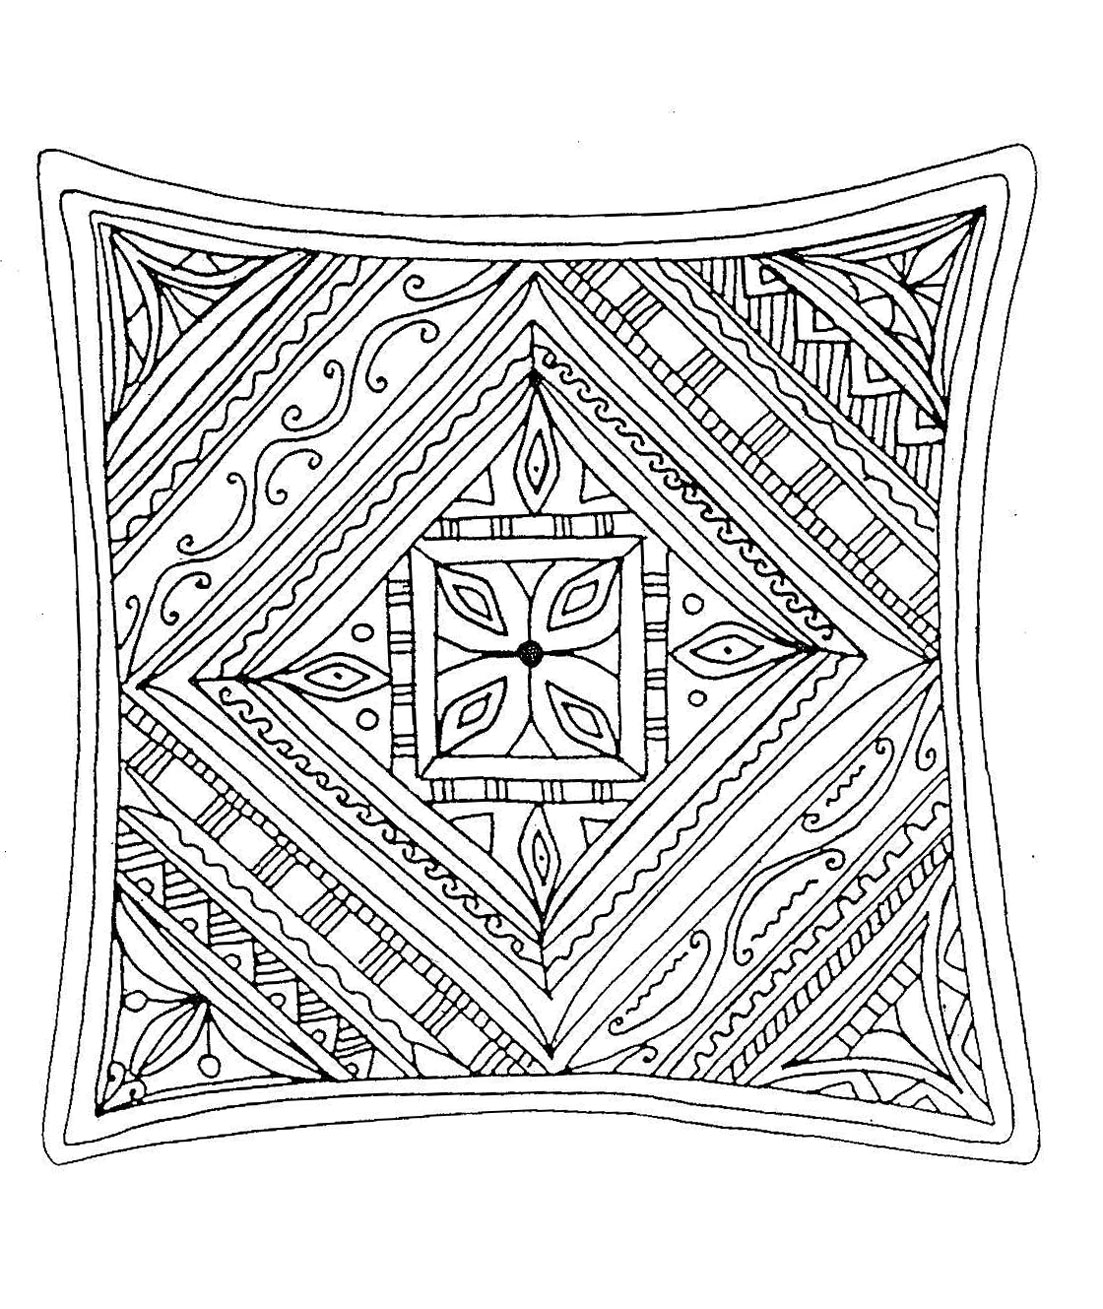 A kind of hand-drawn square mandala, very pretty and soothing